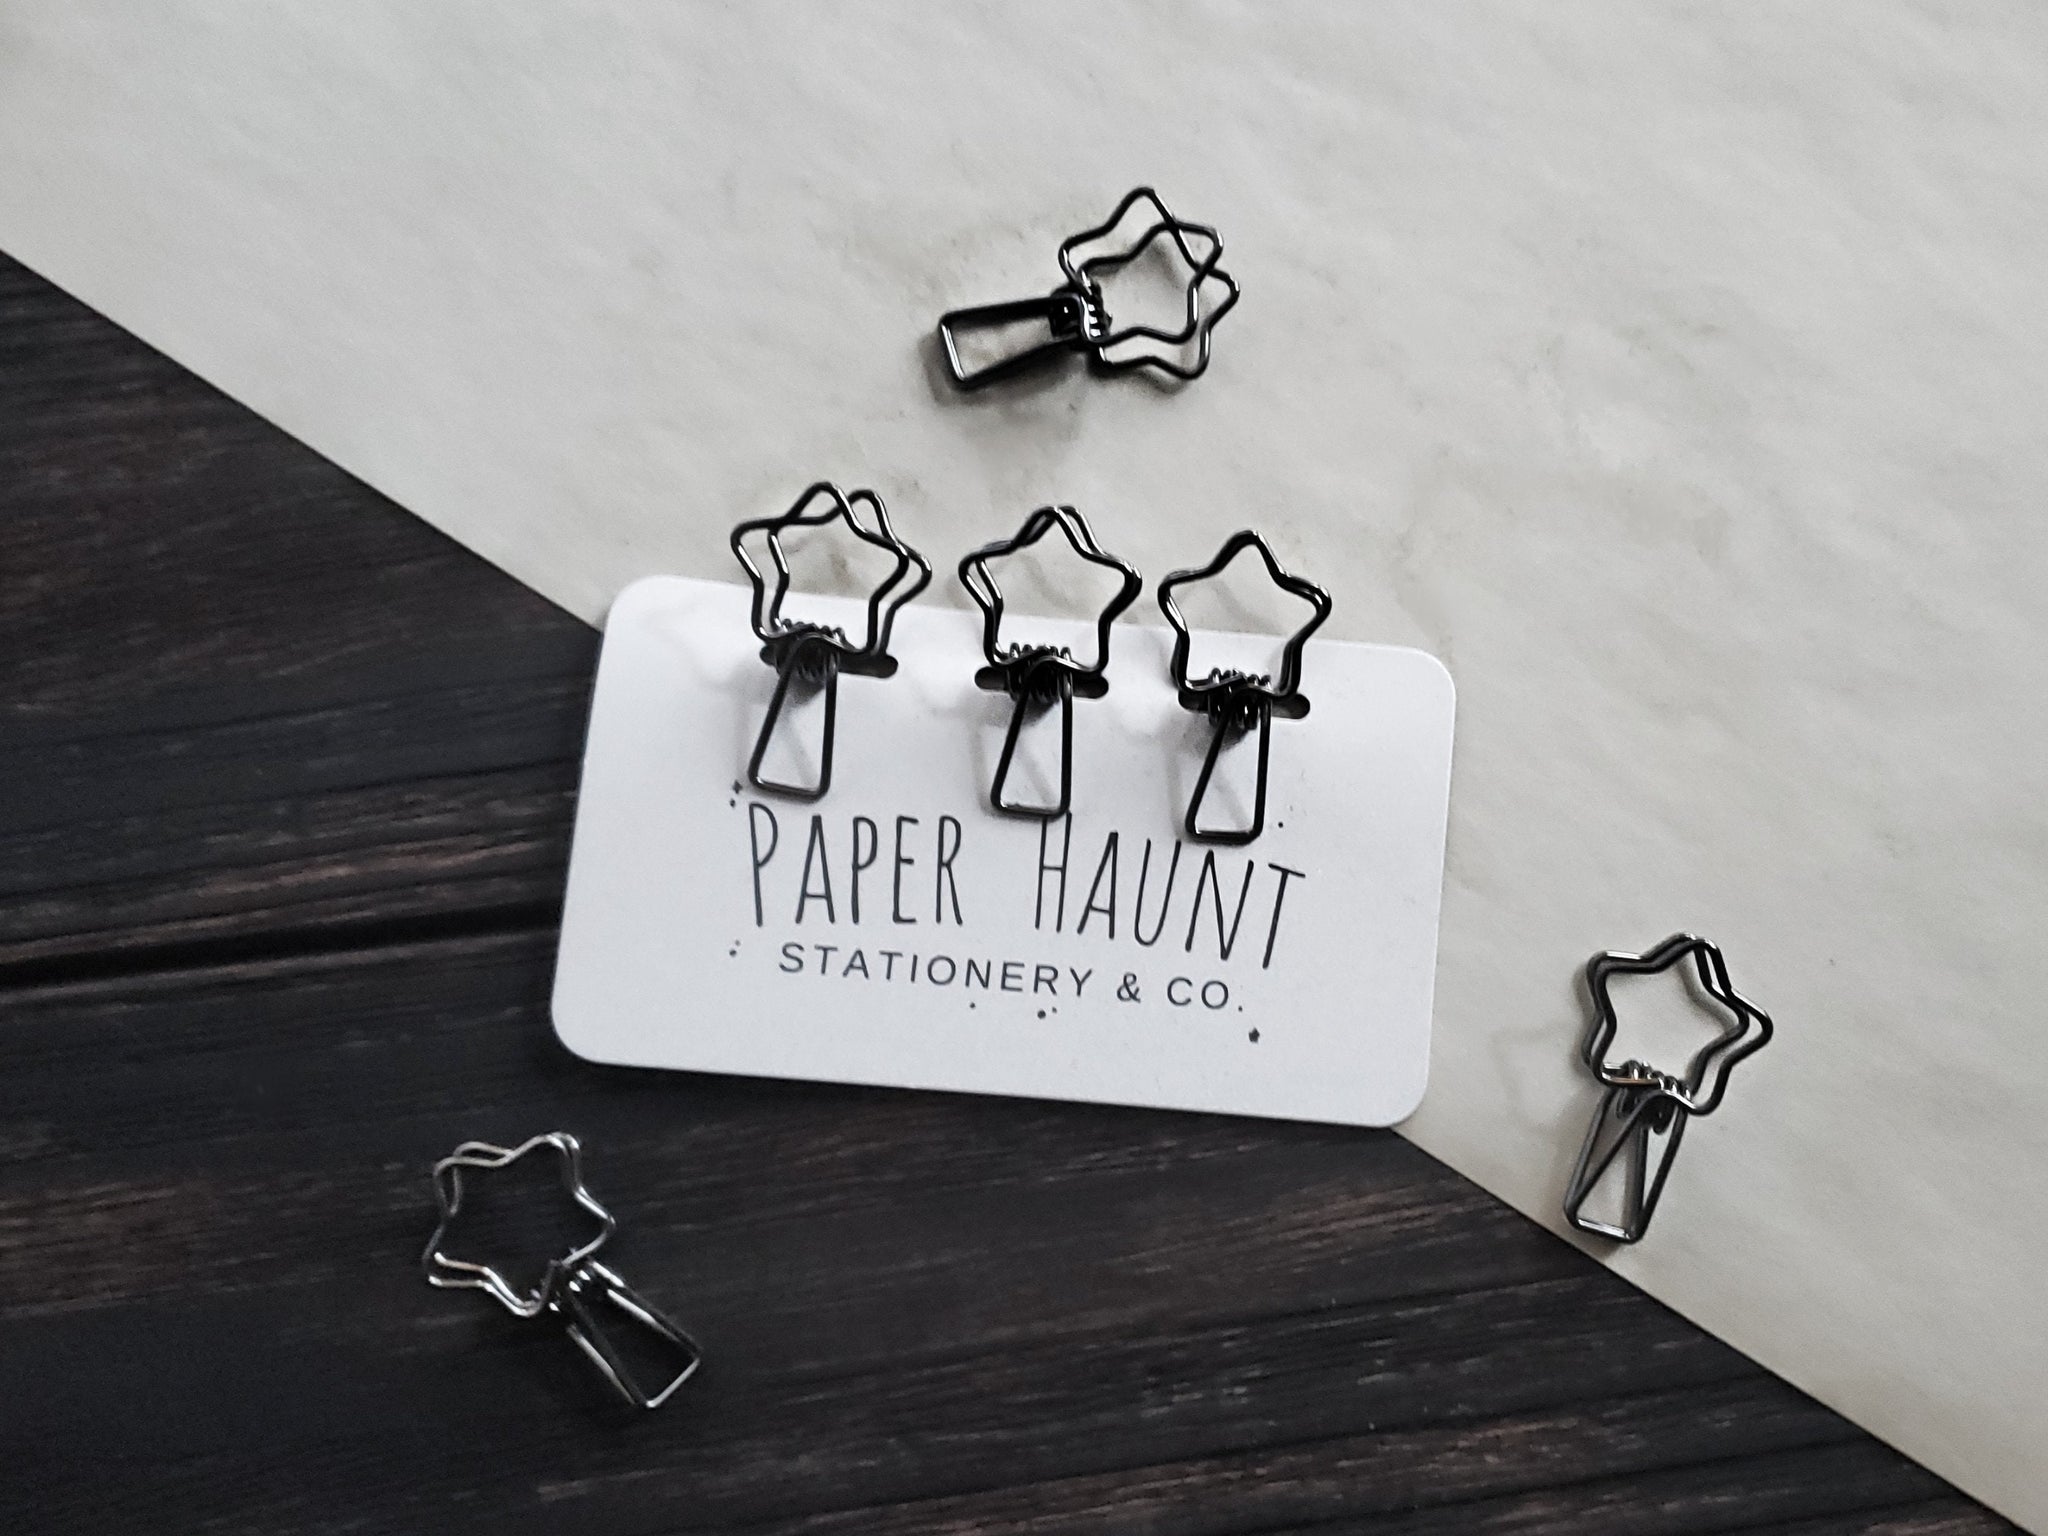 Star Binder clip set paperclips